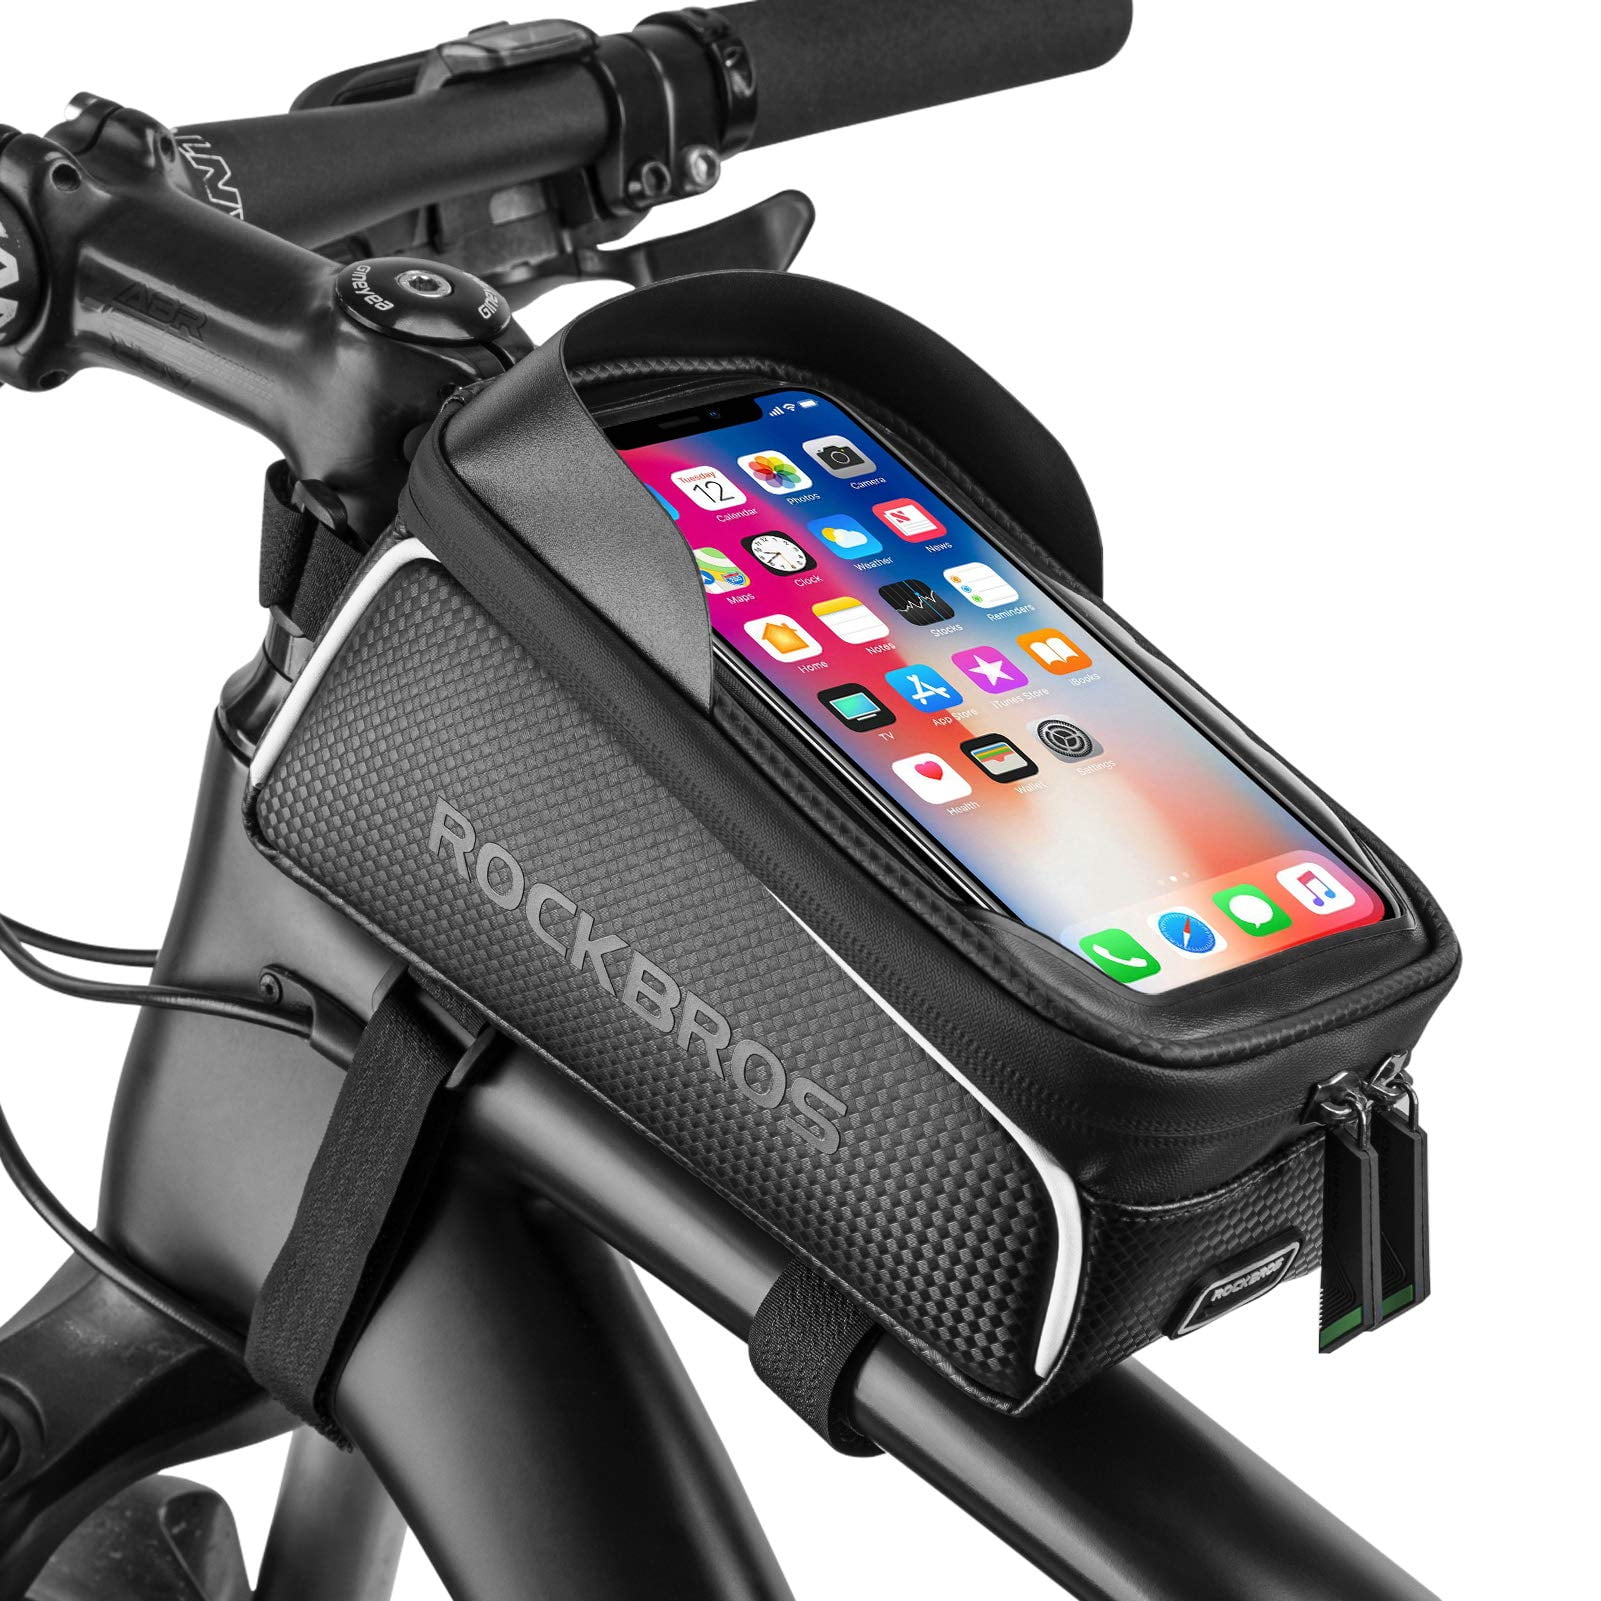 CbRSPORTS Bike Phone Pouch Bicycle Front Frame Bag Waterproof Phone Mount Top Tube Cycling Bag Cycling Pouch Accessories for iPhone 11 Plus XS Max Below 6.5-7” 